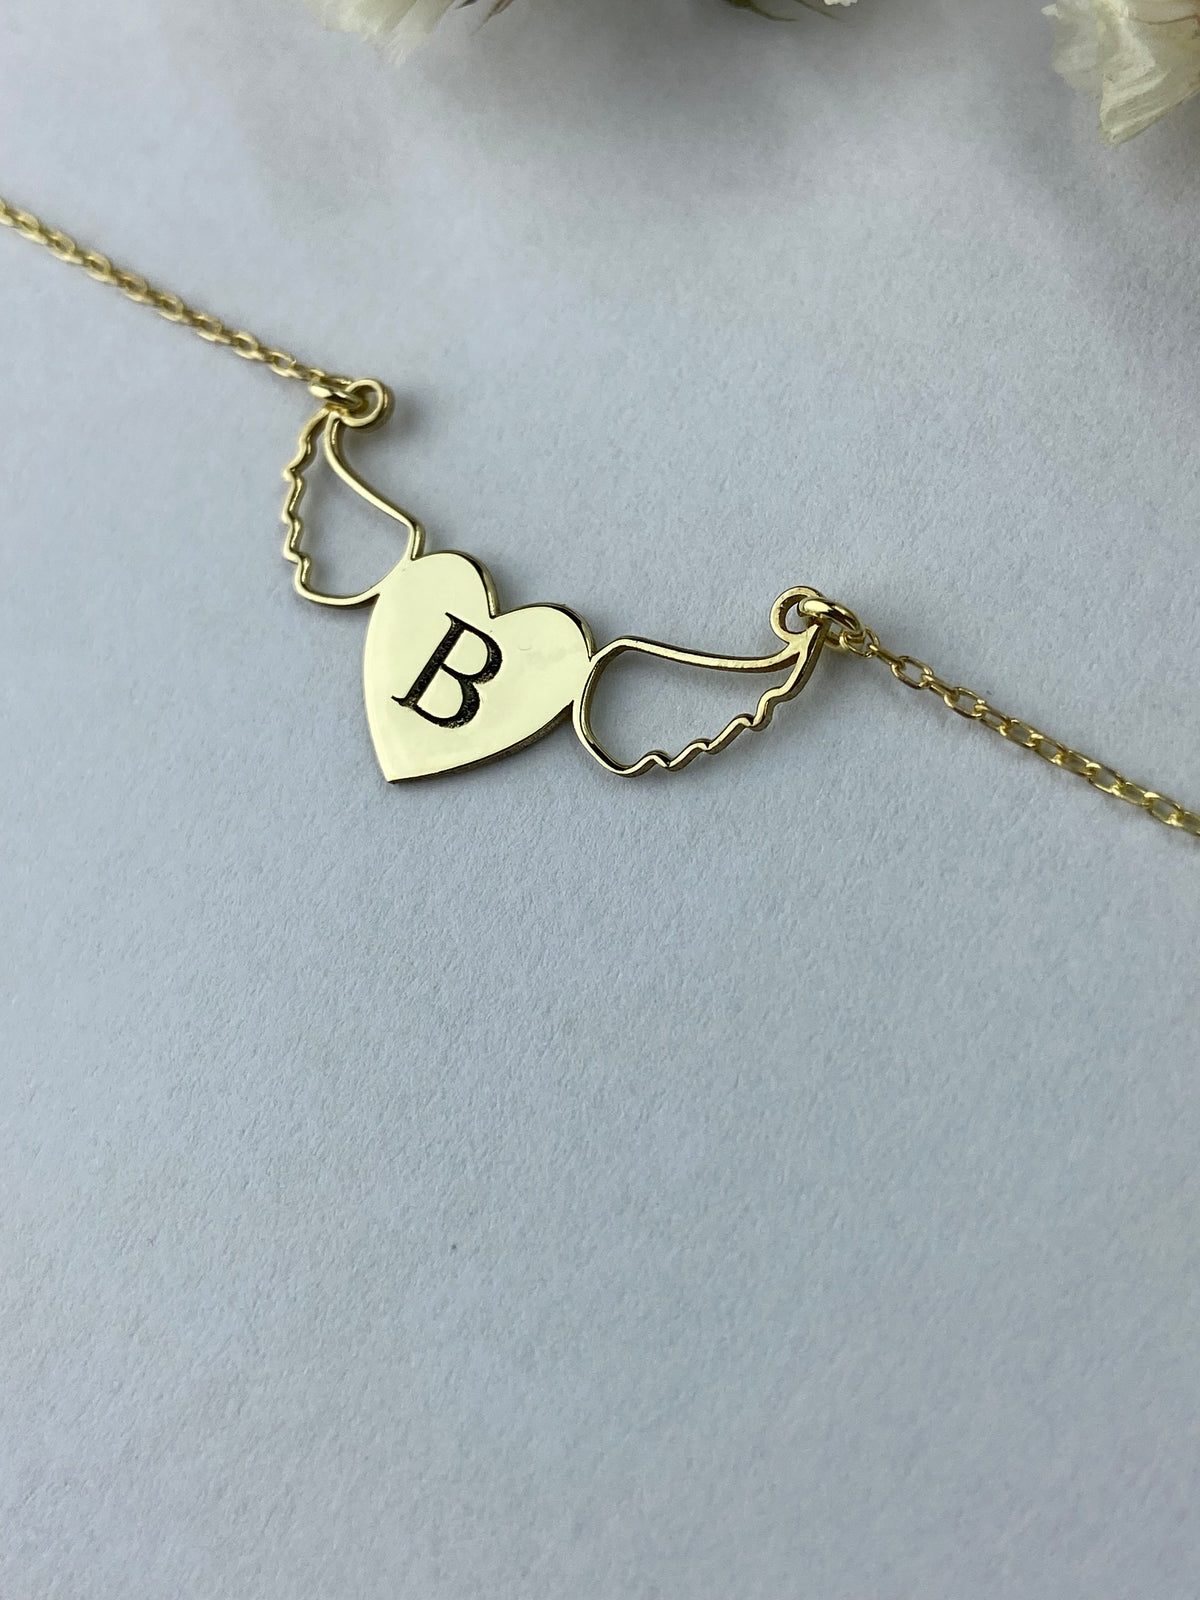 Personalized Initial Heart Necklace with Angel Wings • Unique Memorial Letter Jewelry with Birthstone add on